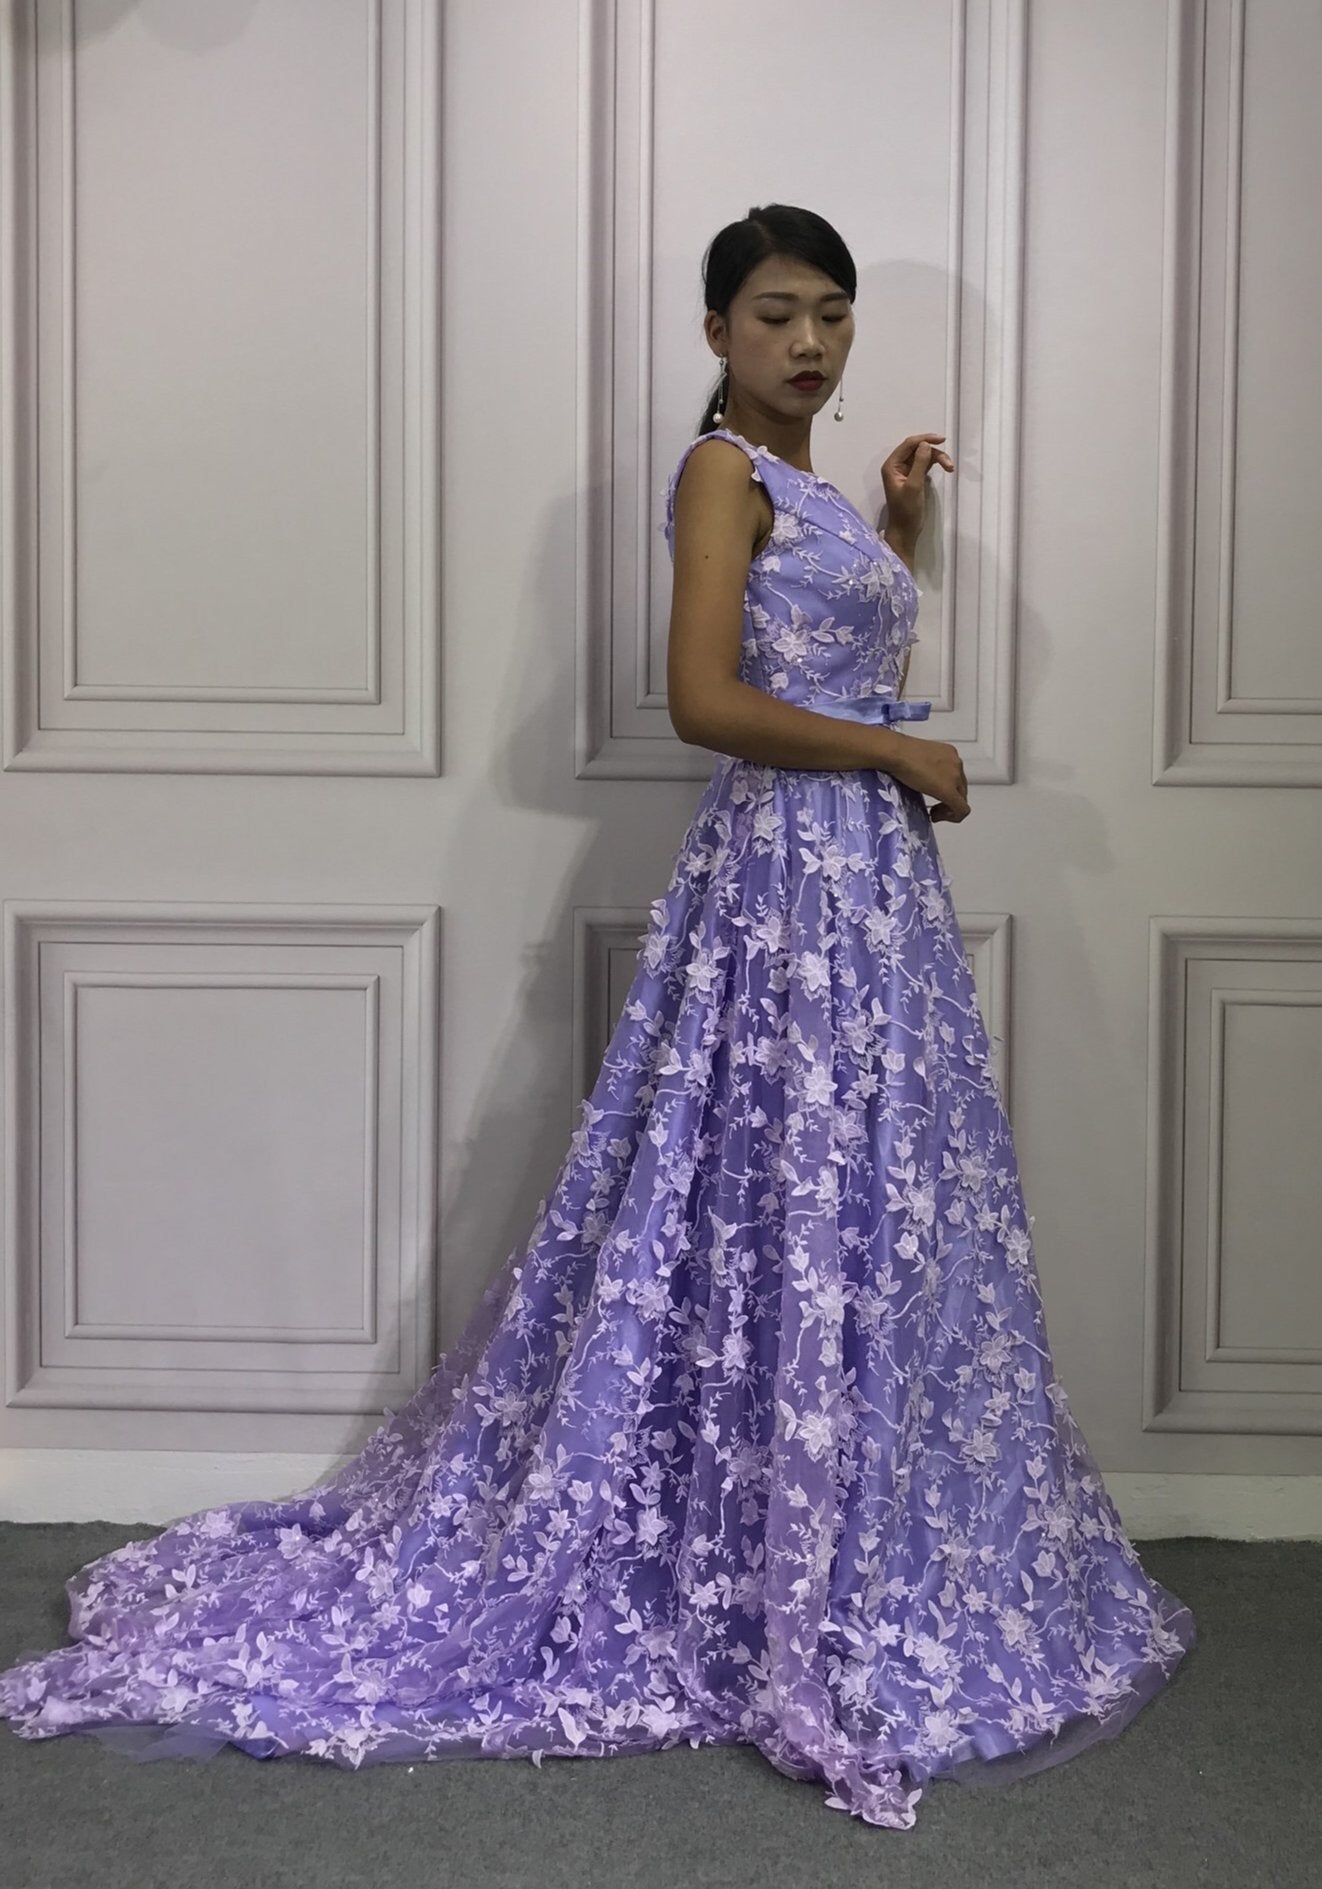 Elegant Off Shoulder Tulle Ball Gown Prom Dress With Short Sleeves, Puffy  Floral Design In Fairytale Pink For Evening And Quinceanera From  Aiyawedding, $171.86 | DHgate.Com